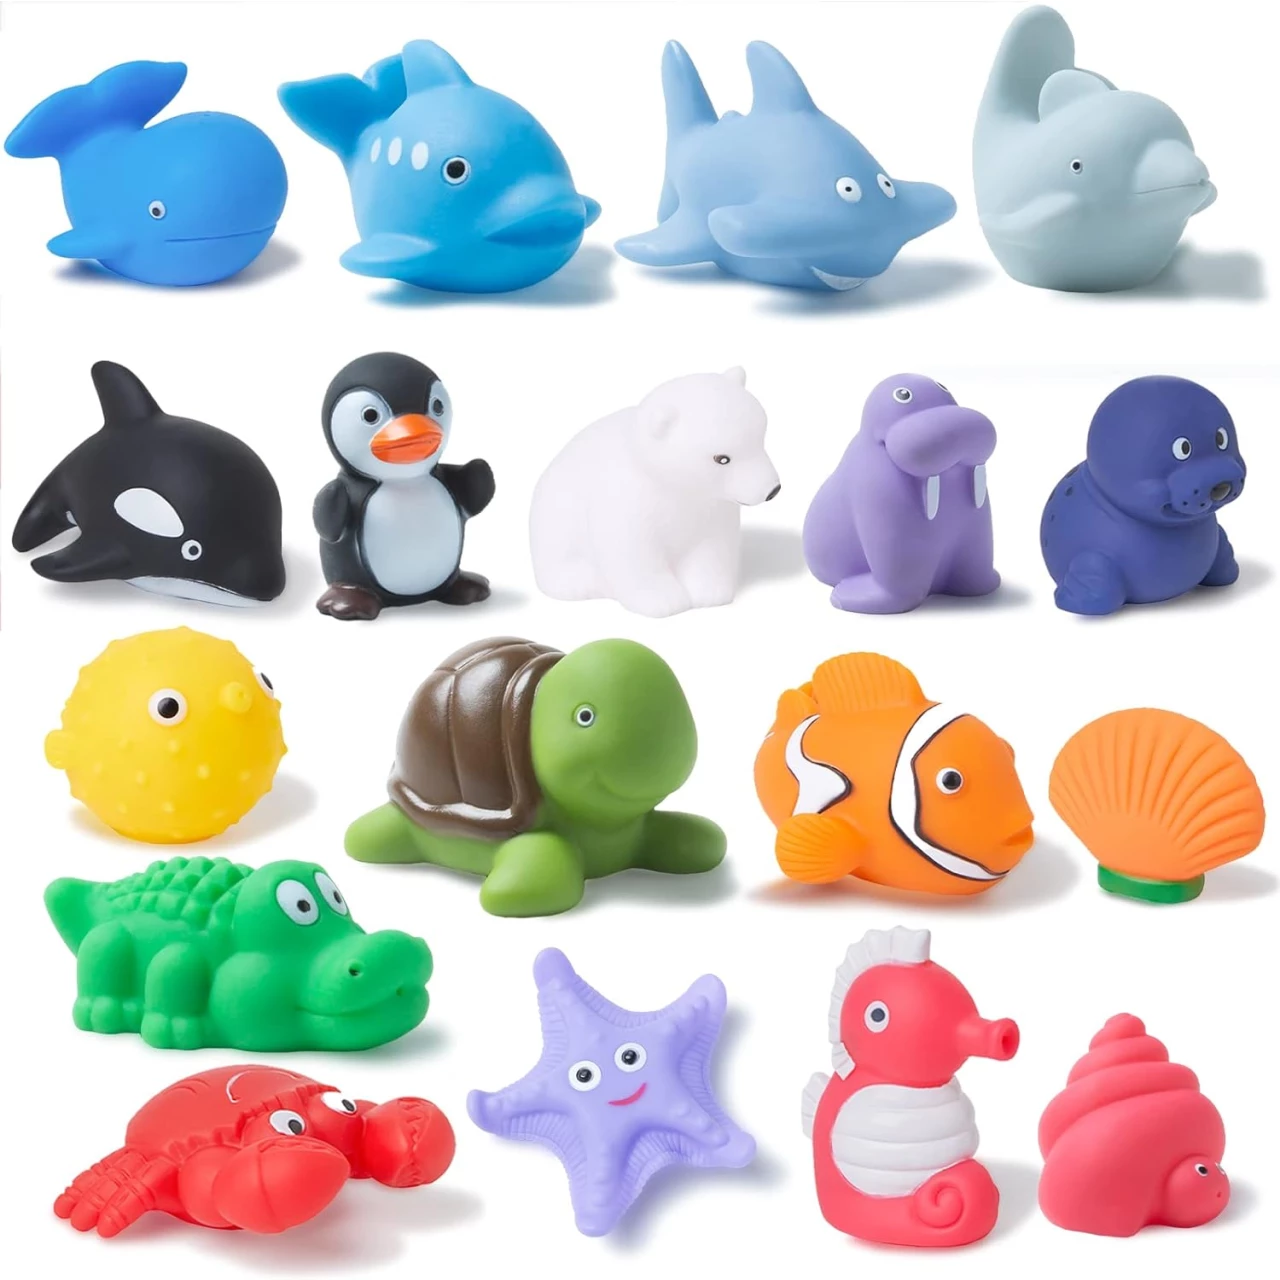 Mold Free Bath Toys 18 Pcs for Toddlers/ Infants 6 - 12- 18 Months, No Hole No Mold Bathtub Toys, 1 2 3 4 Years Old Kids (18 Pcs Ocean Animals with Mesh Bag)